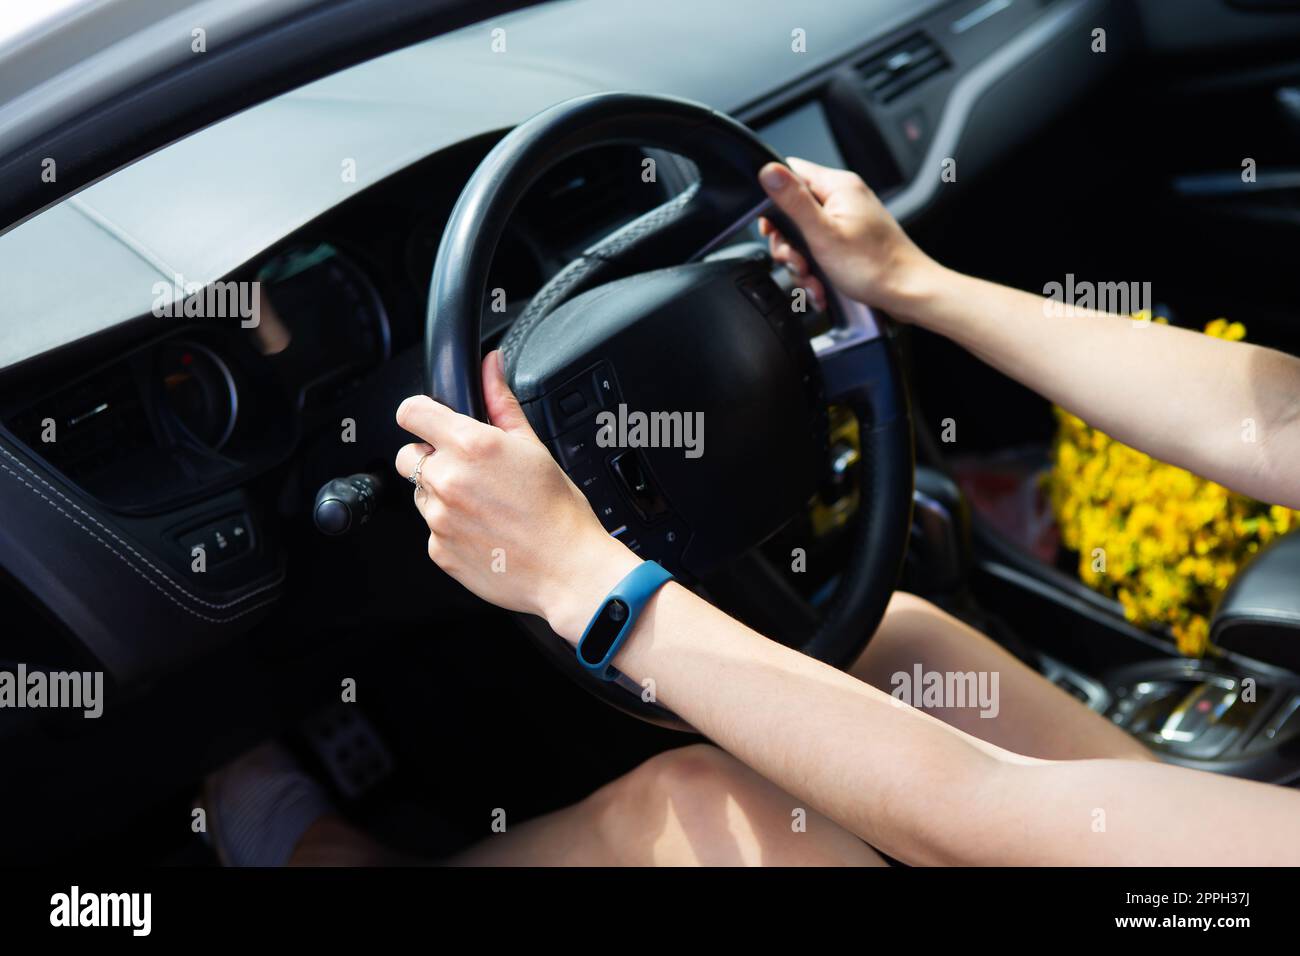 Young girl driving a car, handing over the right to drive a car. Stock Photo